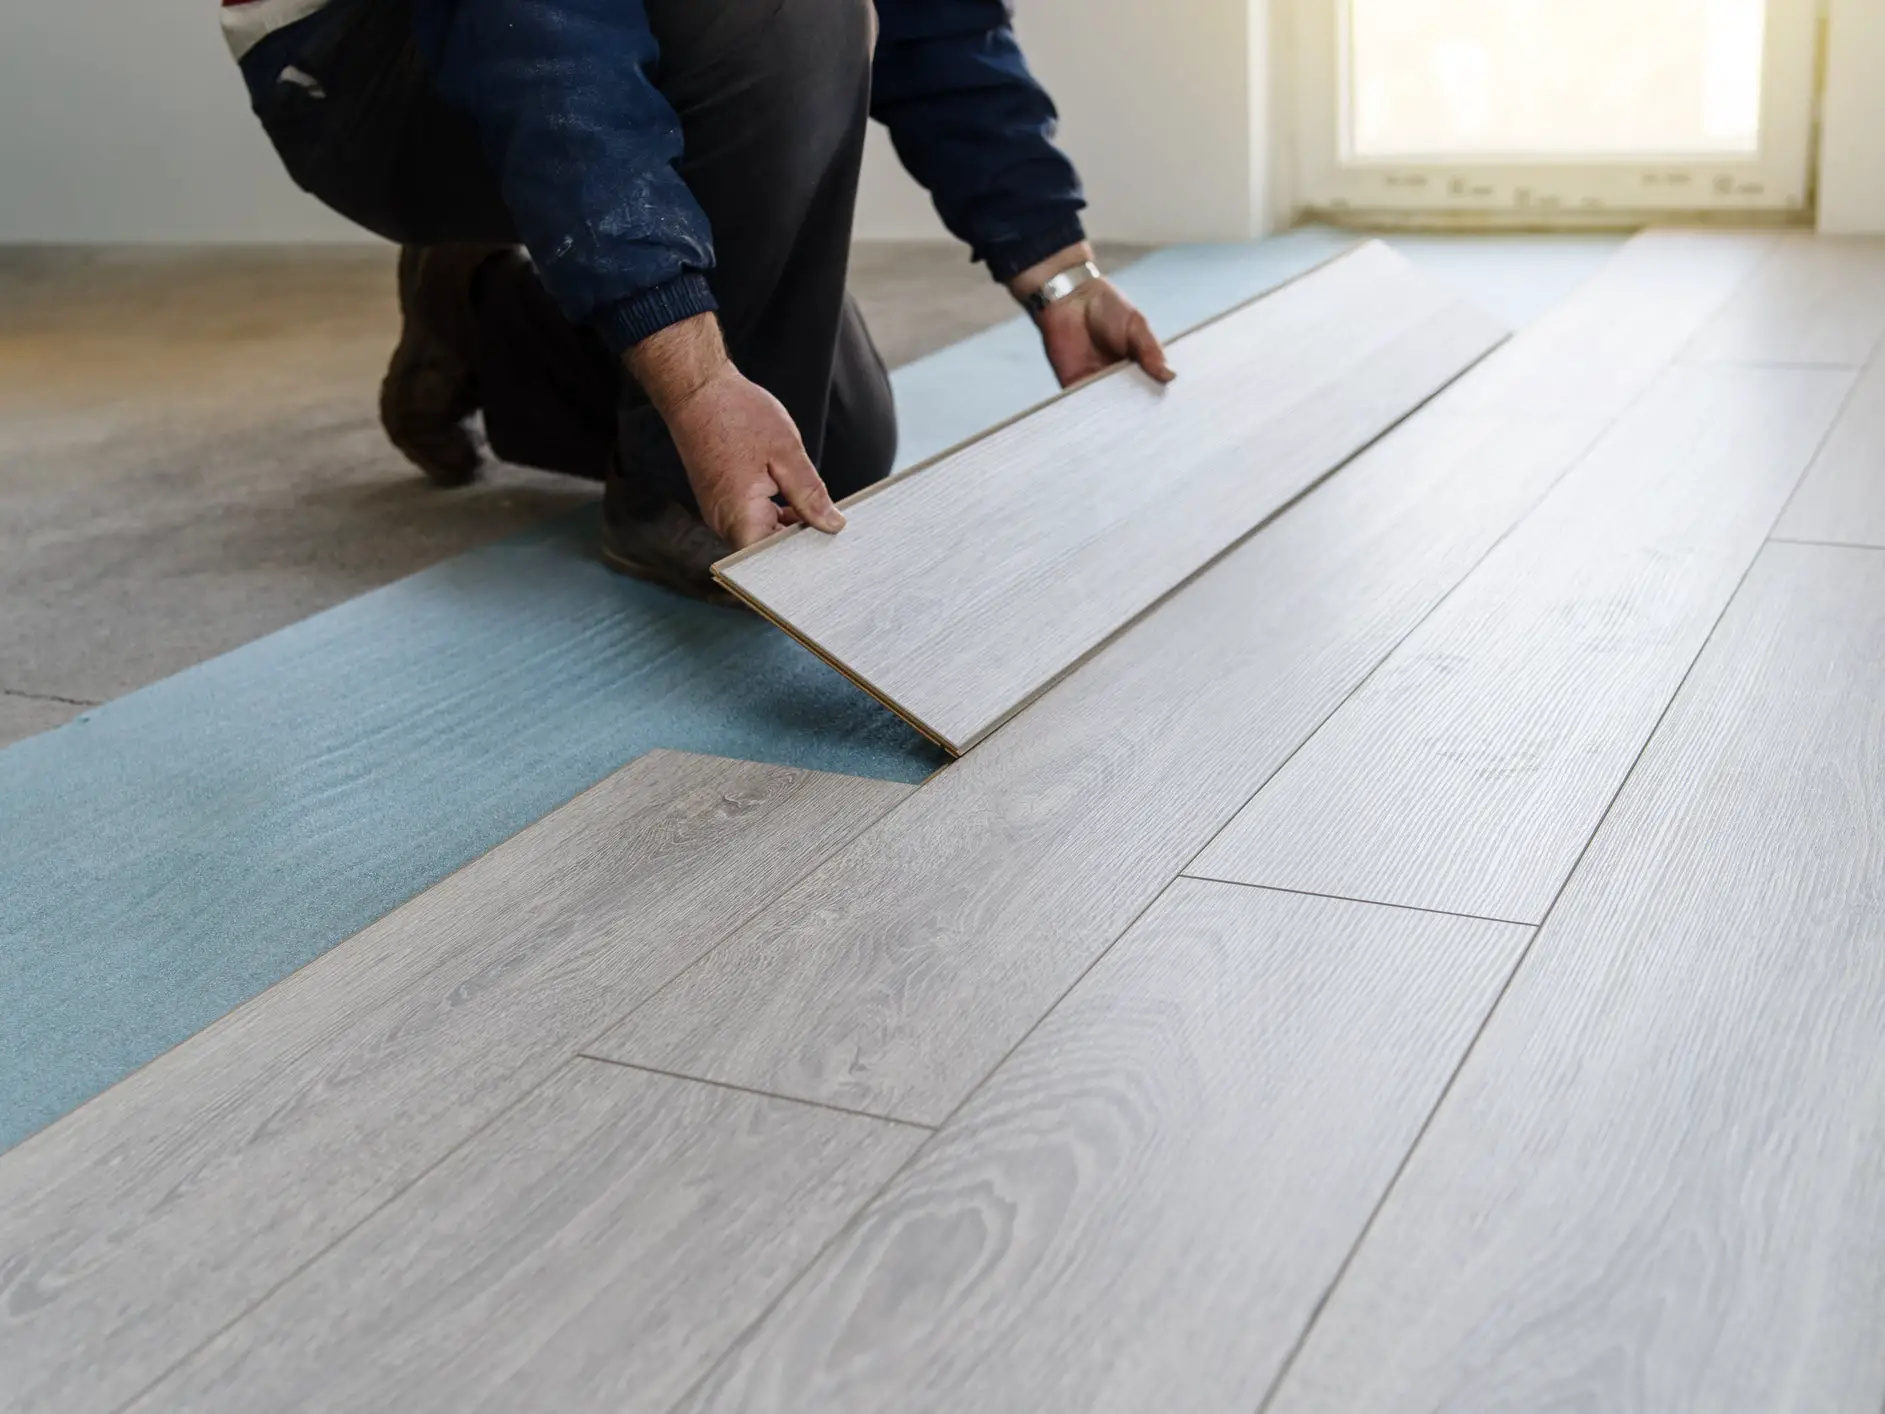 How To Install Temporary Flooring Over, Can You Install Laminate Flooring Over Carpet Glue